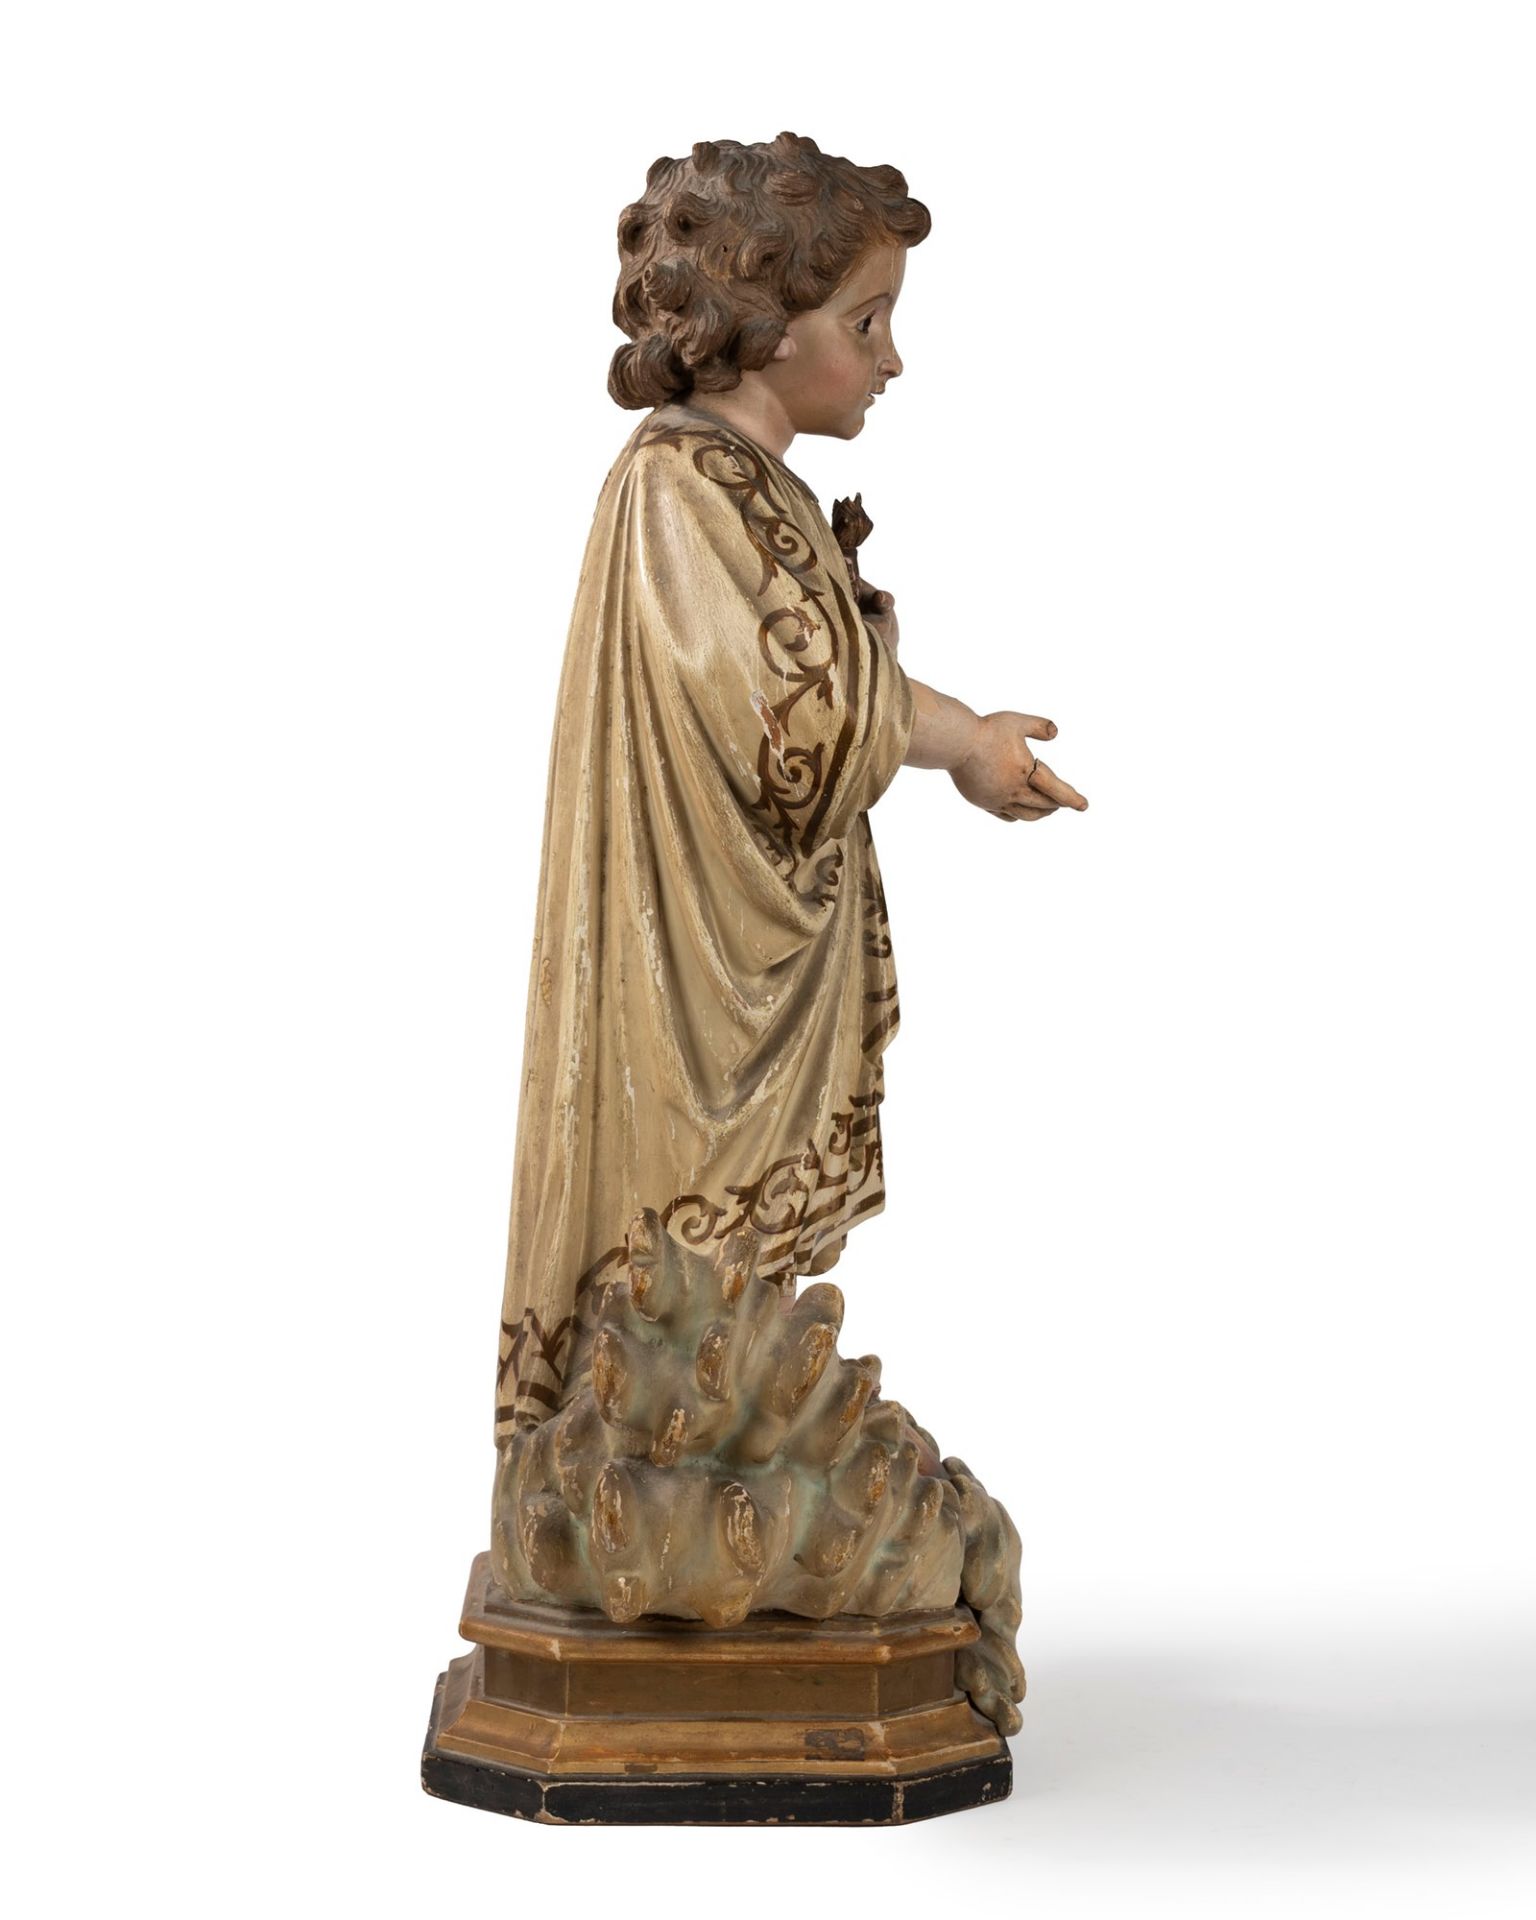 Baby Jesus in carved and lacquered wood, 19th century - Image 7 of 8